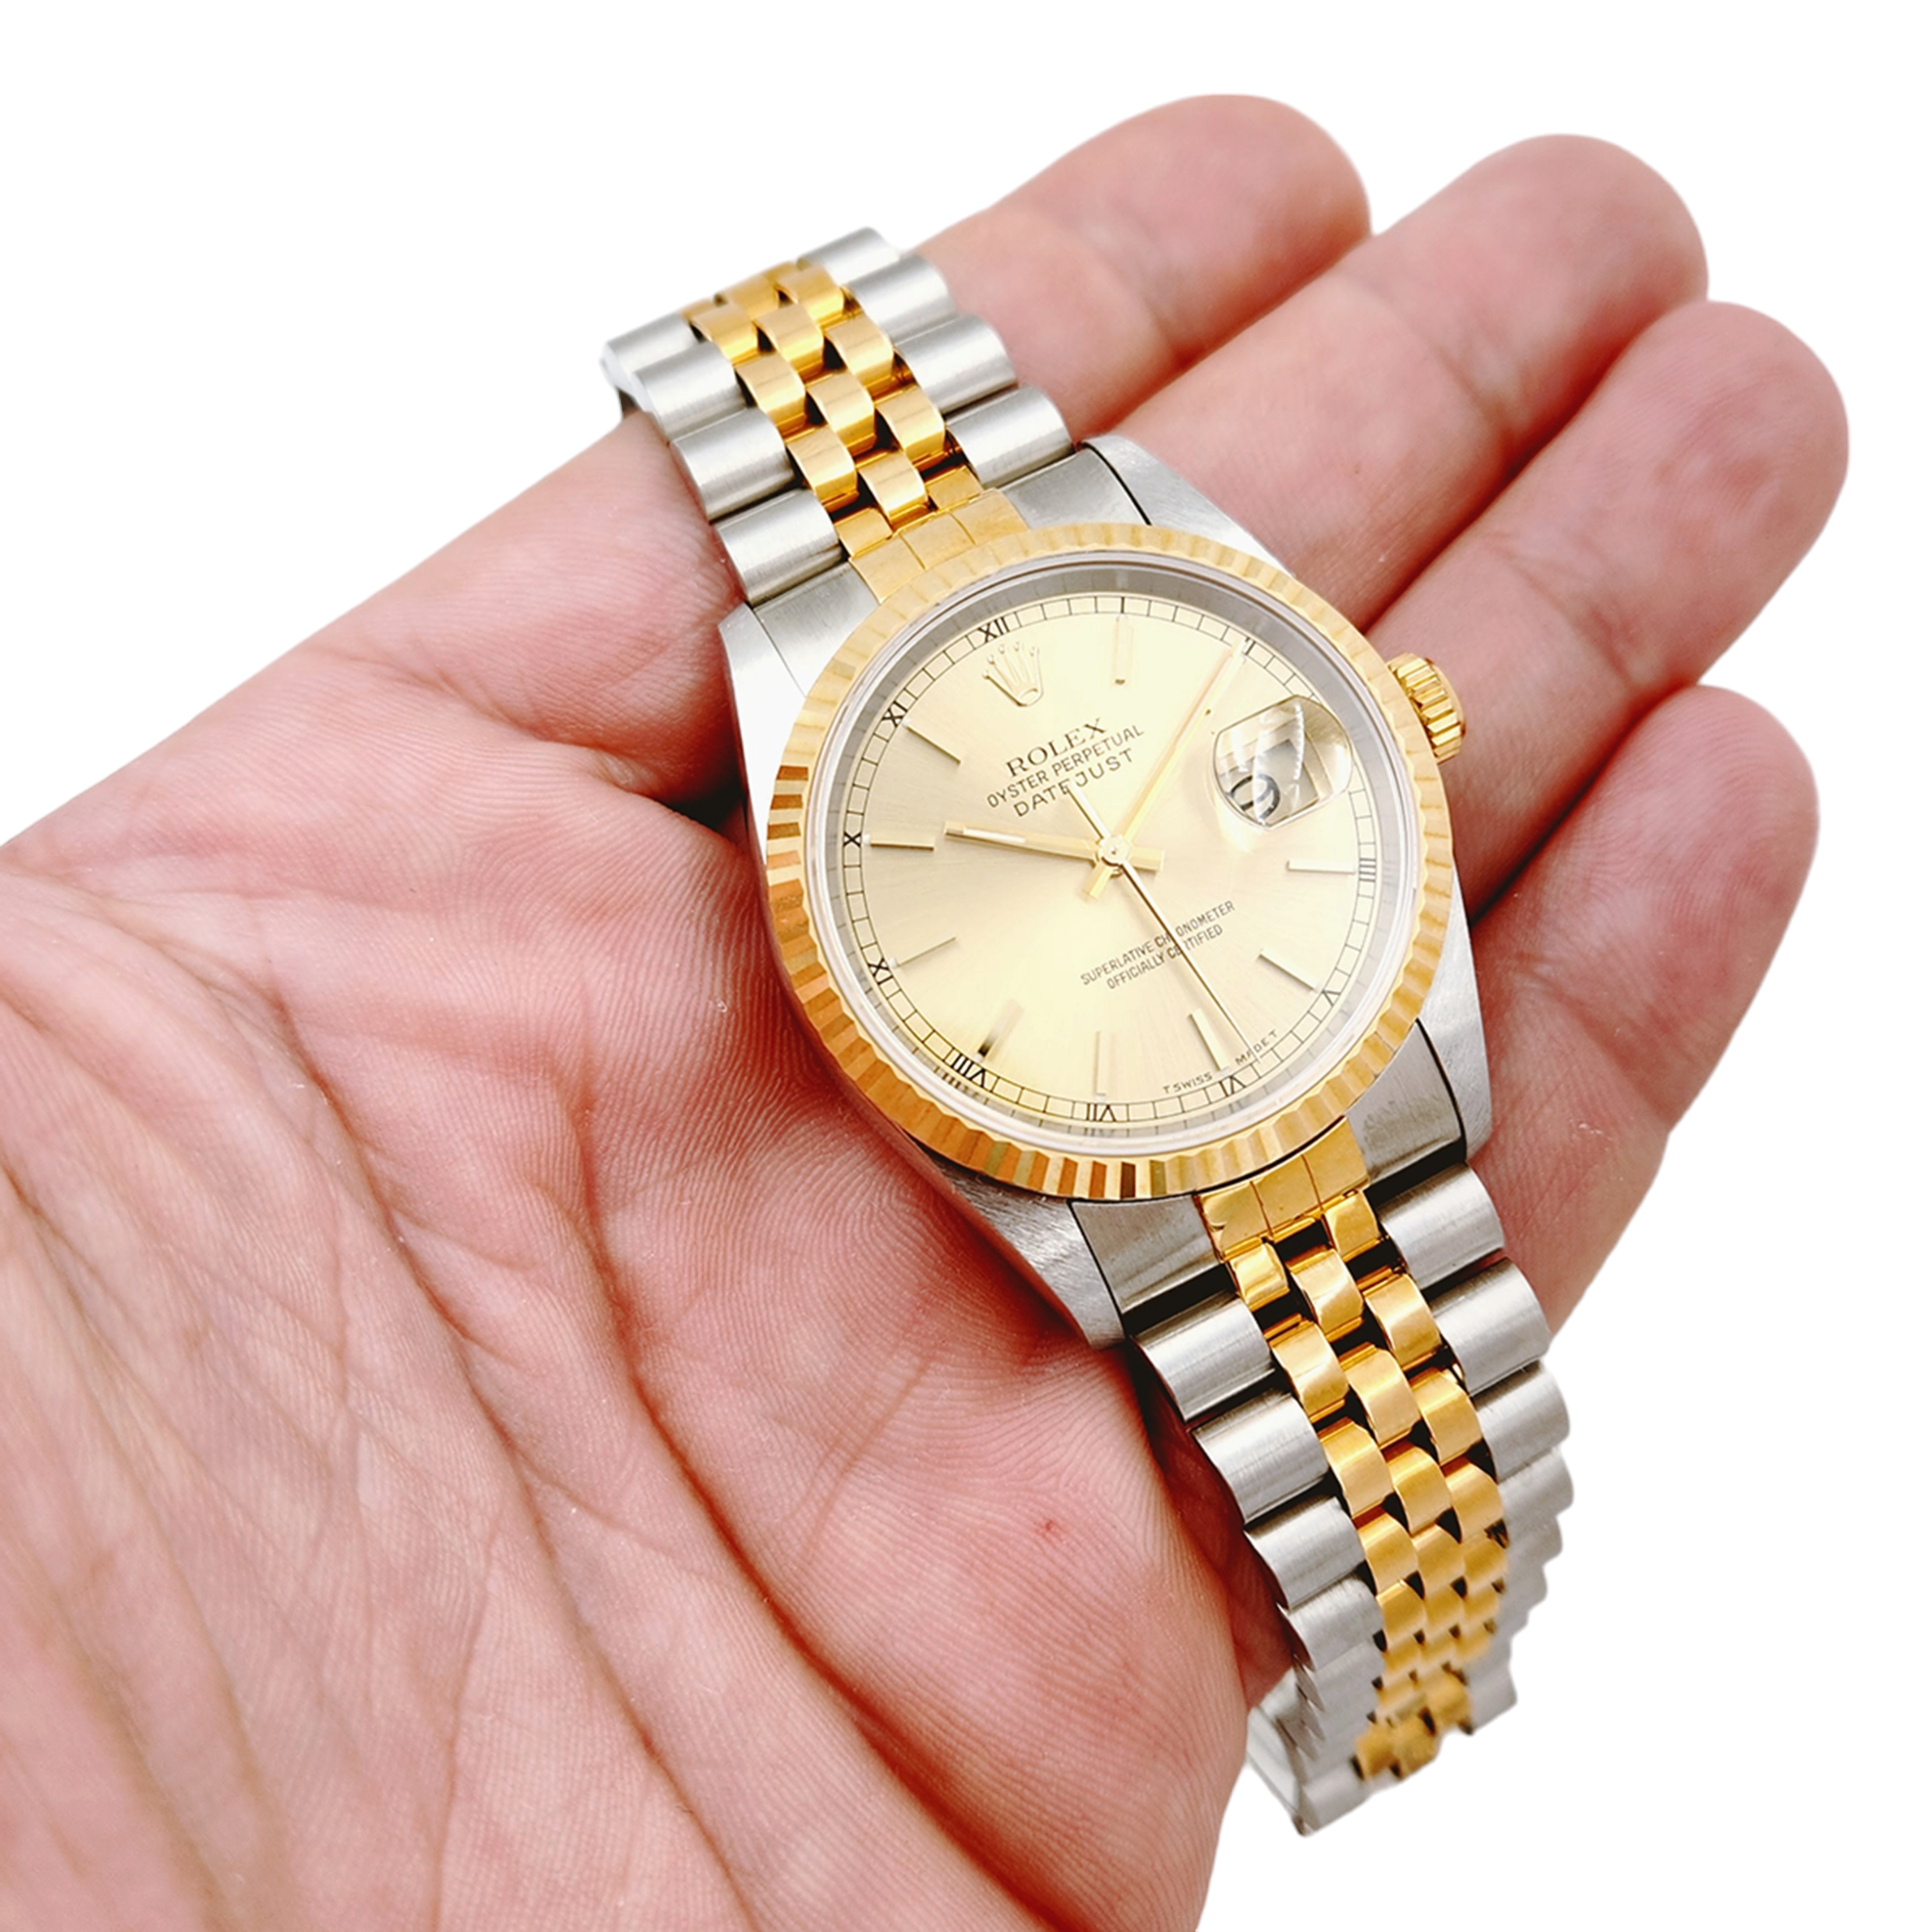 *Men's Rolex 36mm DateJust Two Tone 18K Yellow Gold / Stainless Steel Watch with Fluted Bezel and Champagne Dial. (UNWORN 16233)